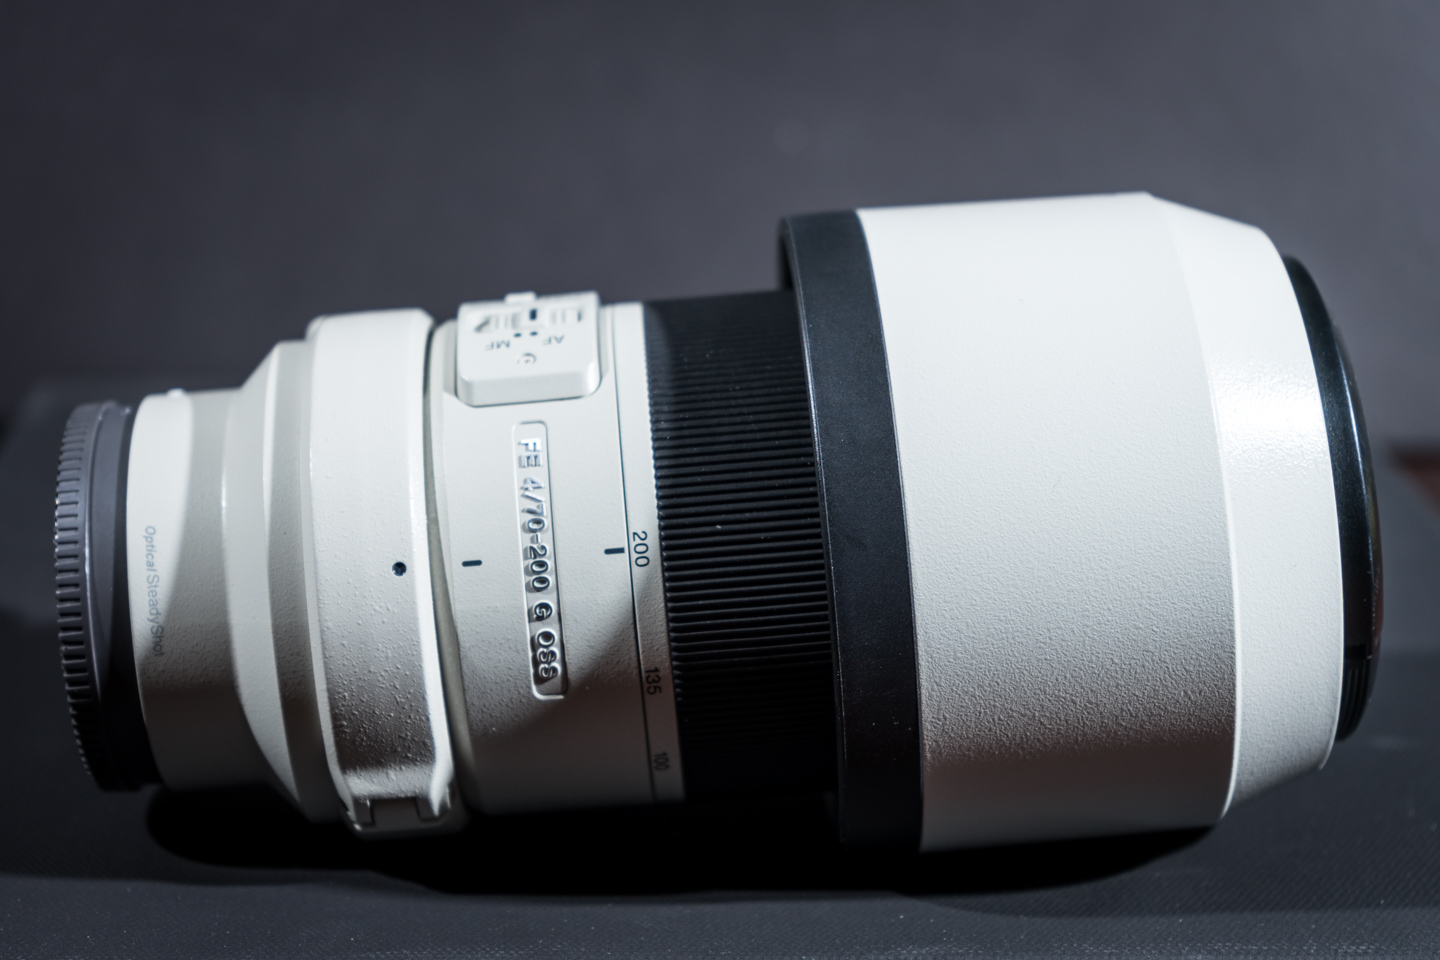 70-200mm f4, for portraits, sports, and close-up detail shots